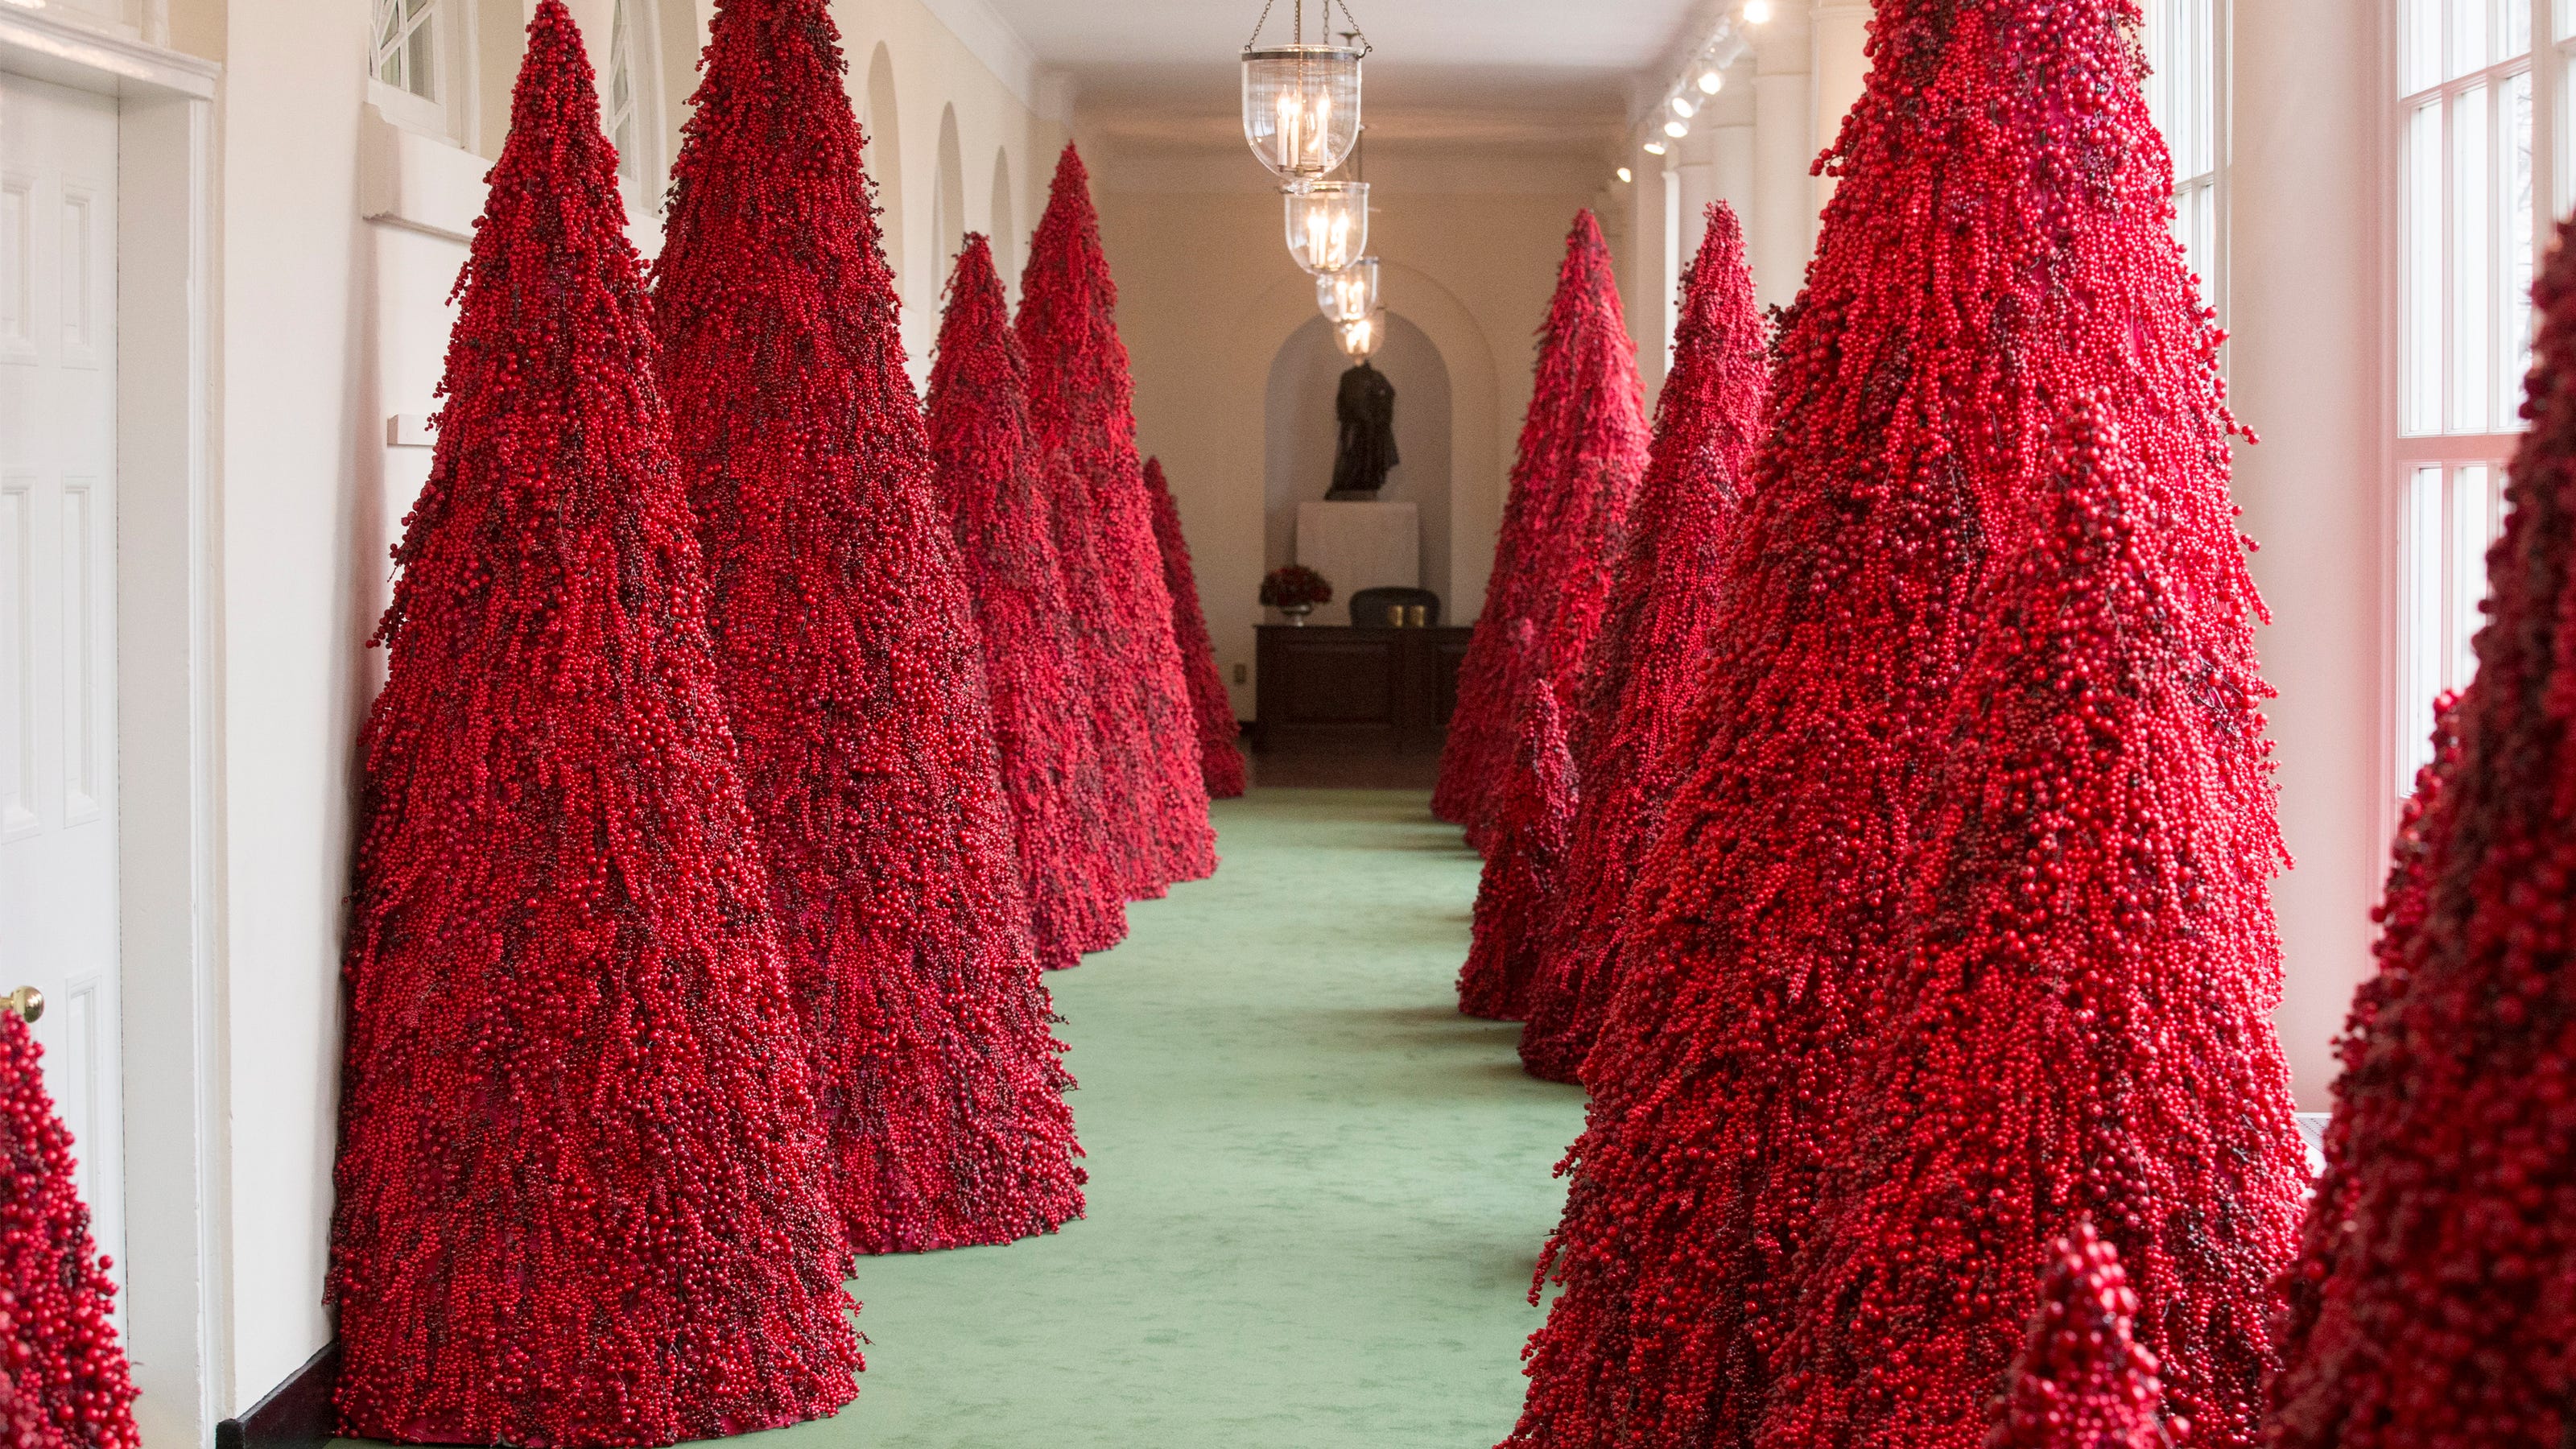 Melania Trump's controversial red trees a hit at Christmas parties